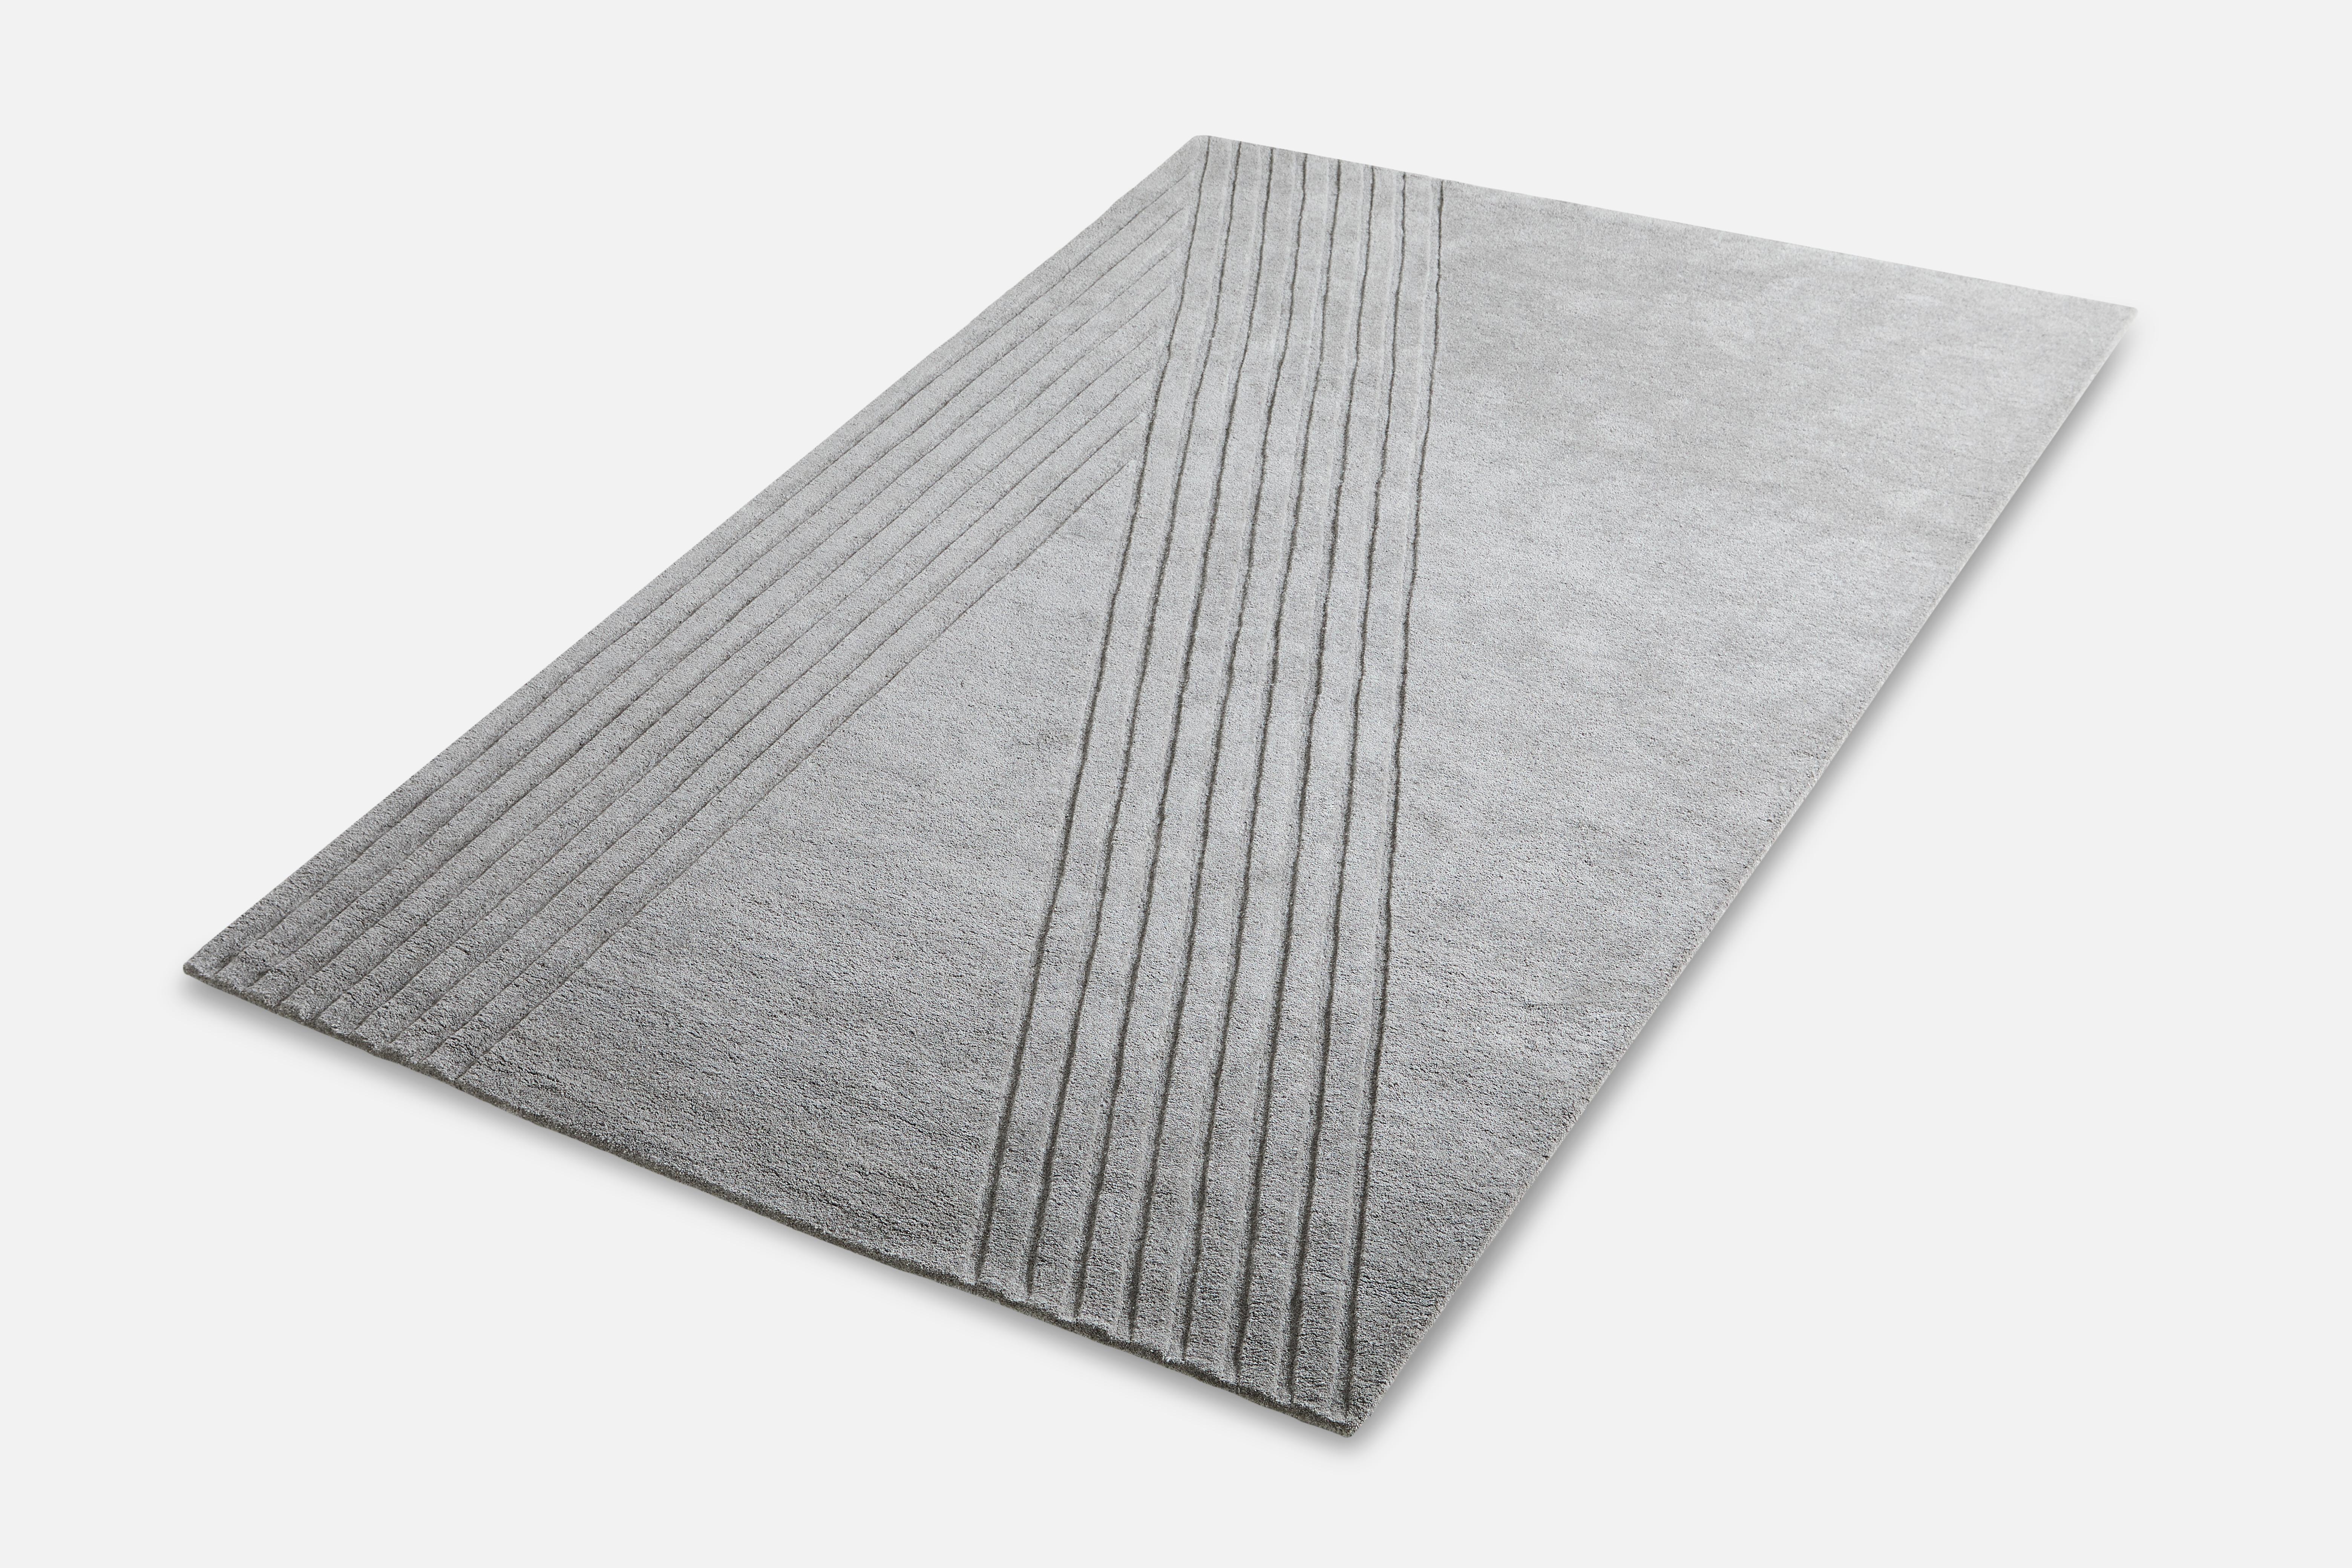 Grey Kyoto rug IV by AD Miller
Materials: 80% wool, 20% cotton.
Dimensions: W 200 x L 300 cm
Available in grey or off white.

The hand-tufted wool rug, Kyoto, takes its inspiration from the distinctive pattern found in traditional raked